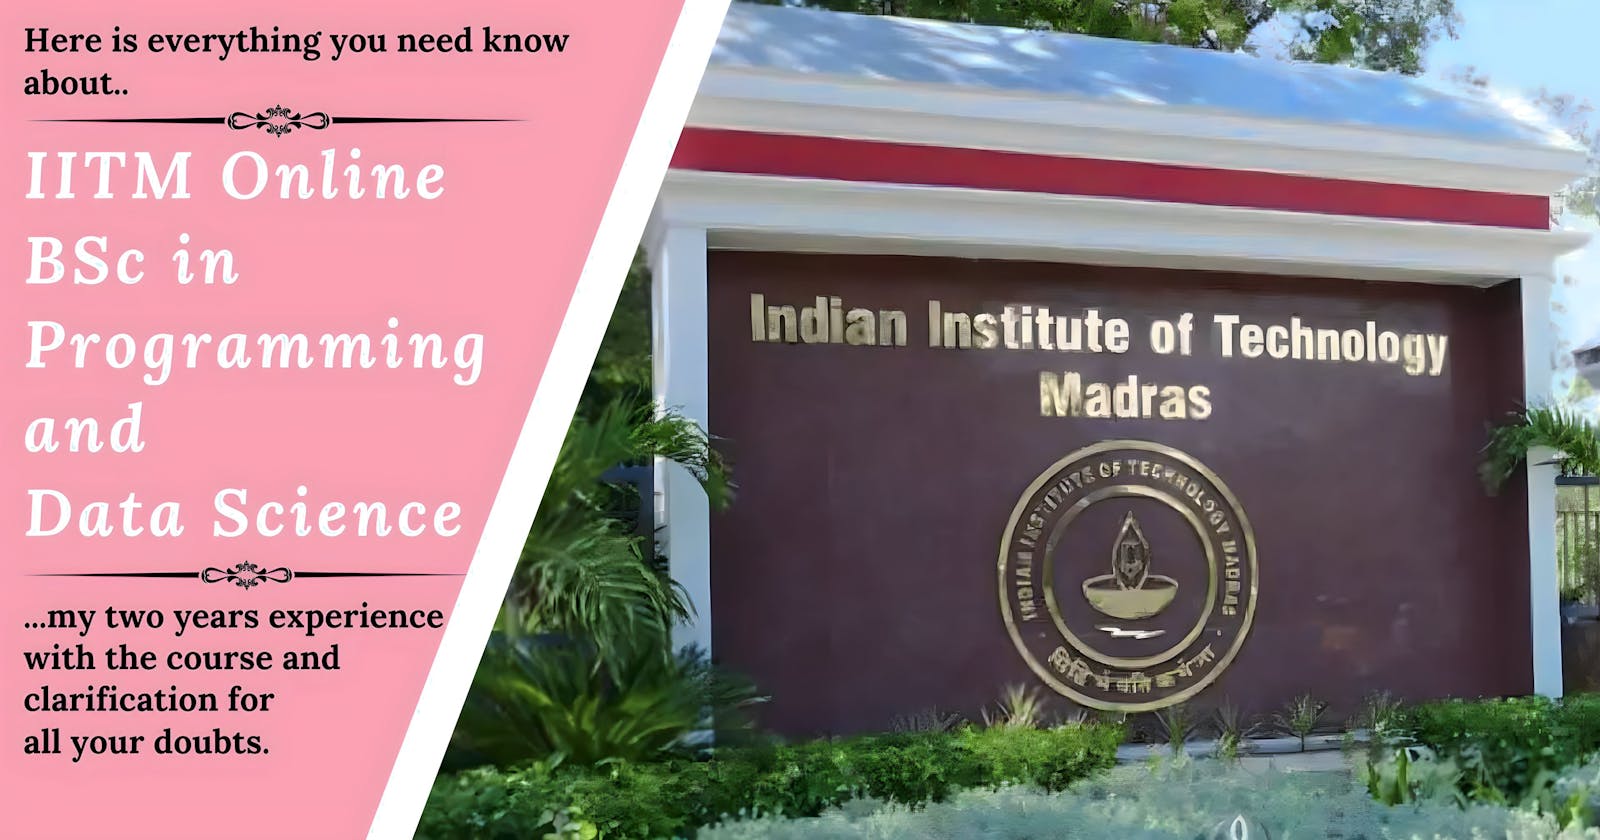 IIT Madras Data Science Degree: Is It Right for You? Let’s Explore through my experience!